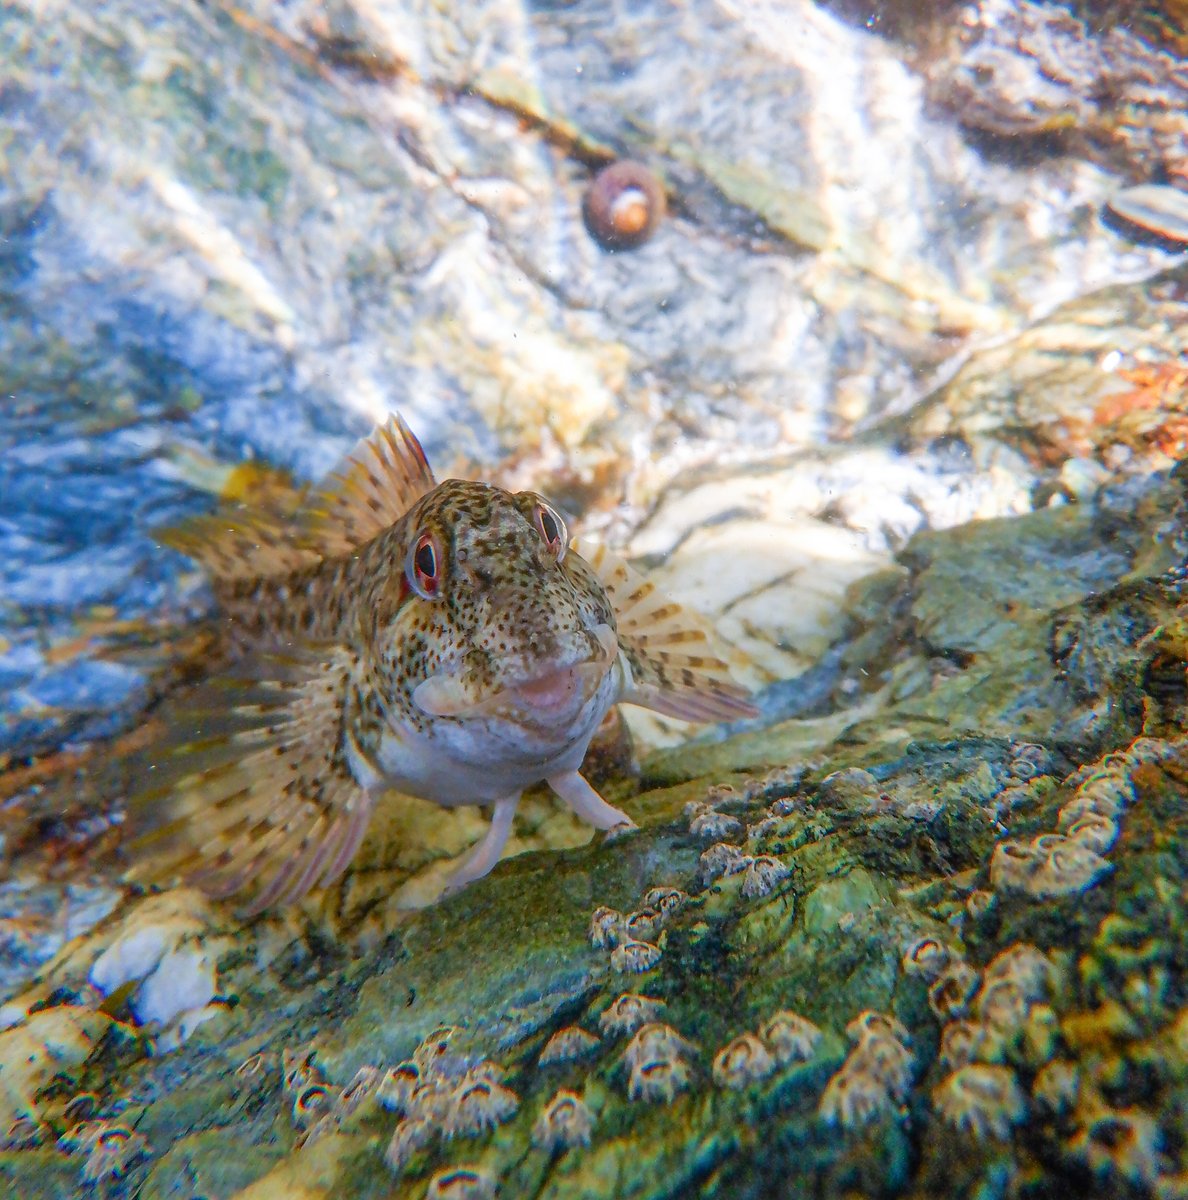 I went snorkelling yesterday and encountered a colony of very large common blennies, who weren't very happy with me exploring their gulley. The water was so clear, and this one posed for a photo (when not biting my toes). #marinebiology #snorkeling